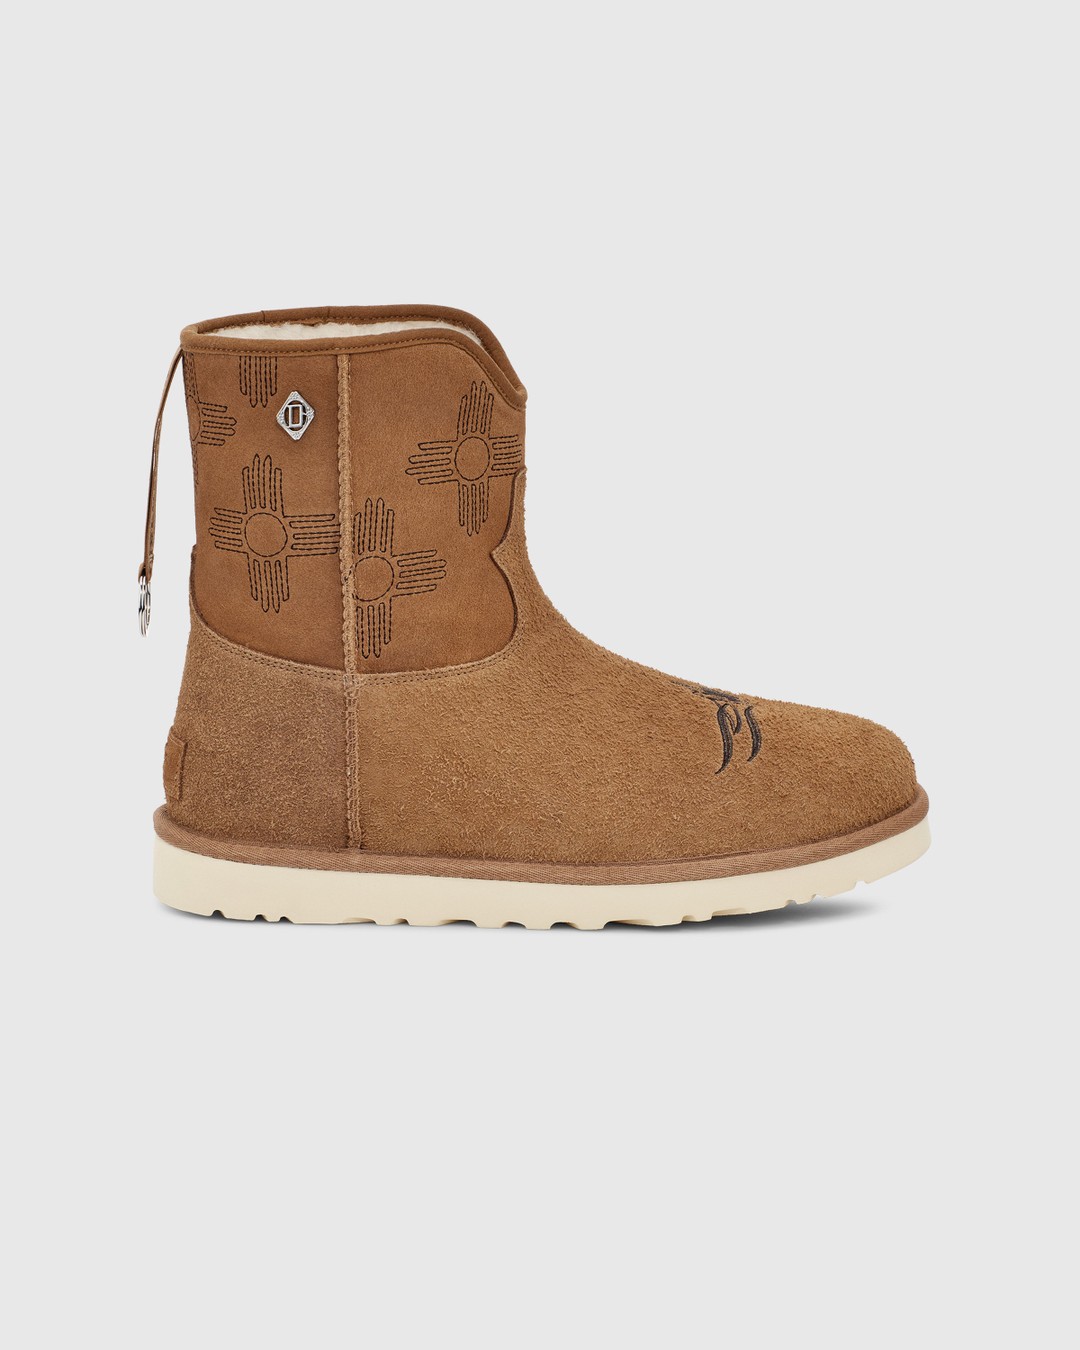 Ugg x Children of the Discordance – Classic Short Boot Brown - Lined Boots - Brown - Image 1